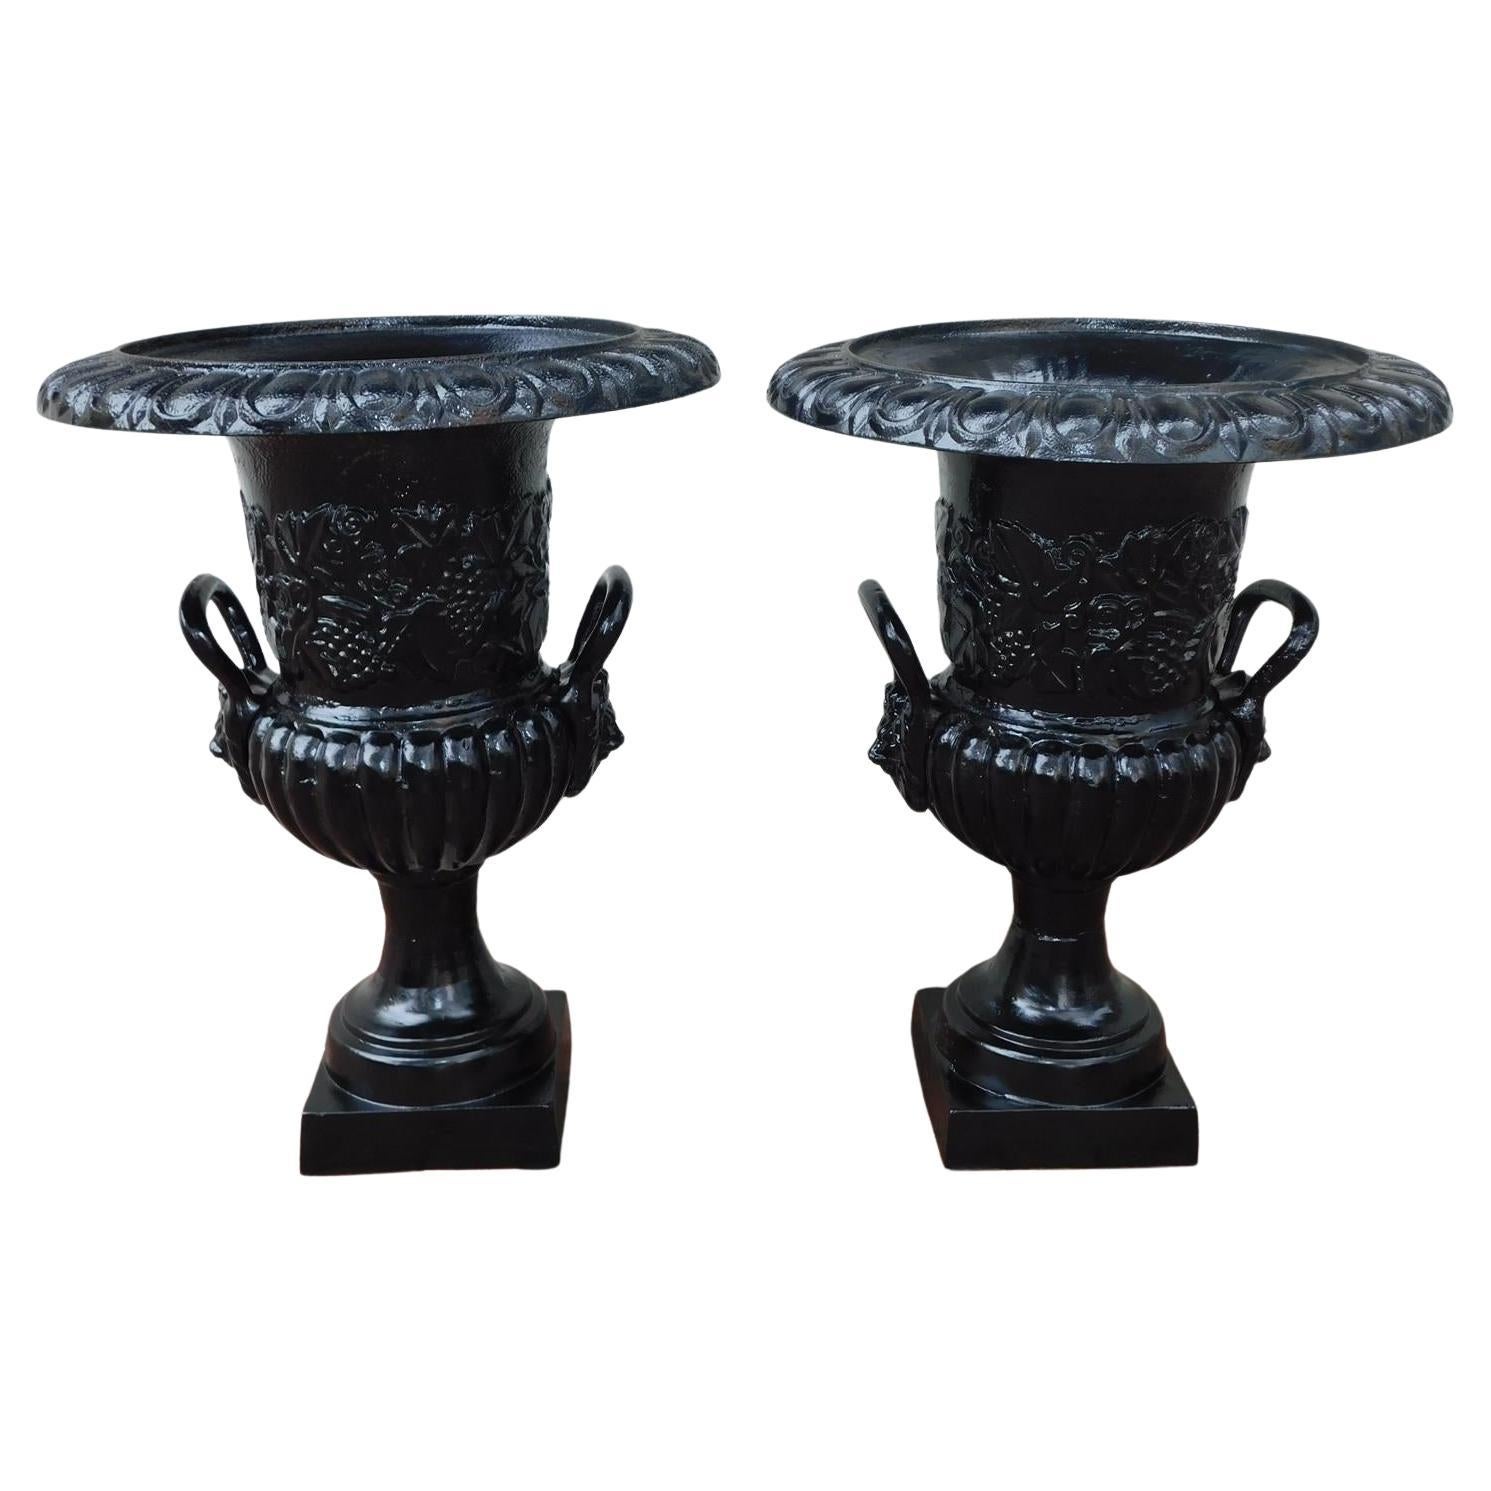 Pair of English Cast Iron and Powered Coated Campana-Form Garden Urns, C. 1850